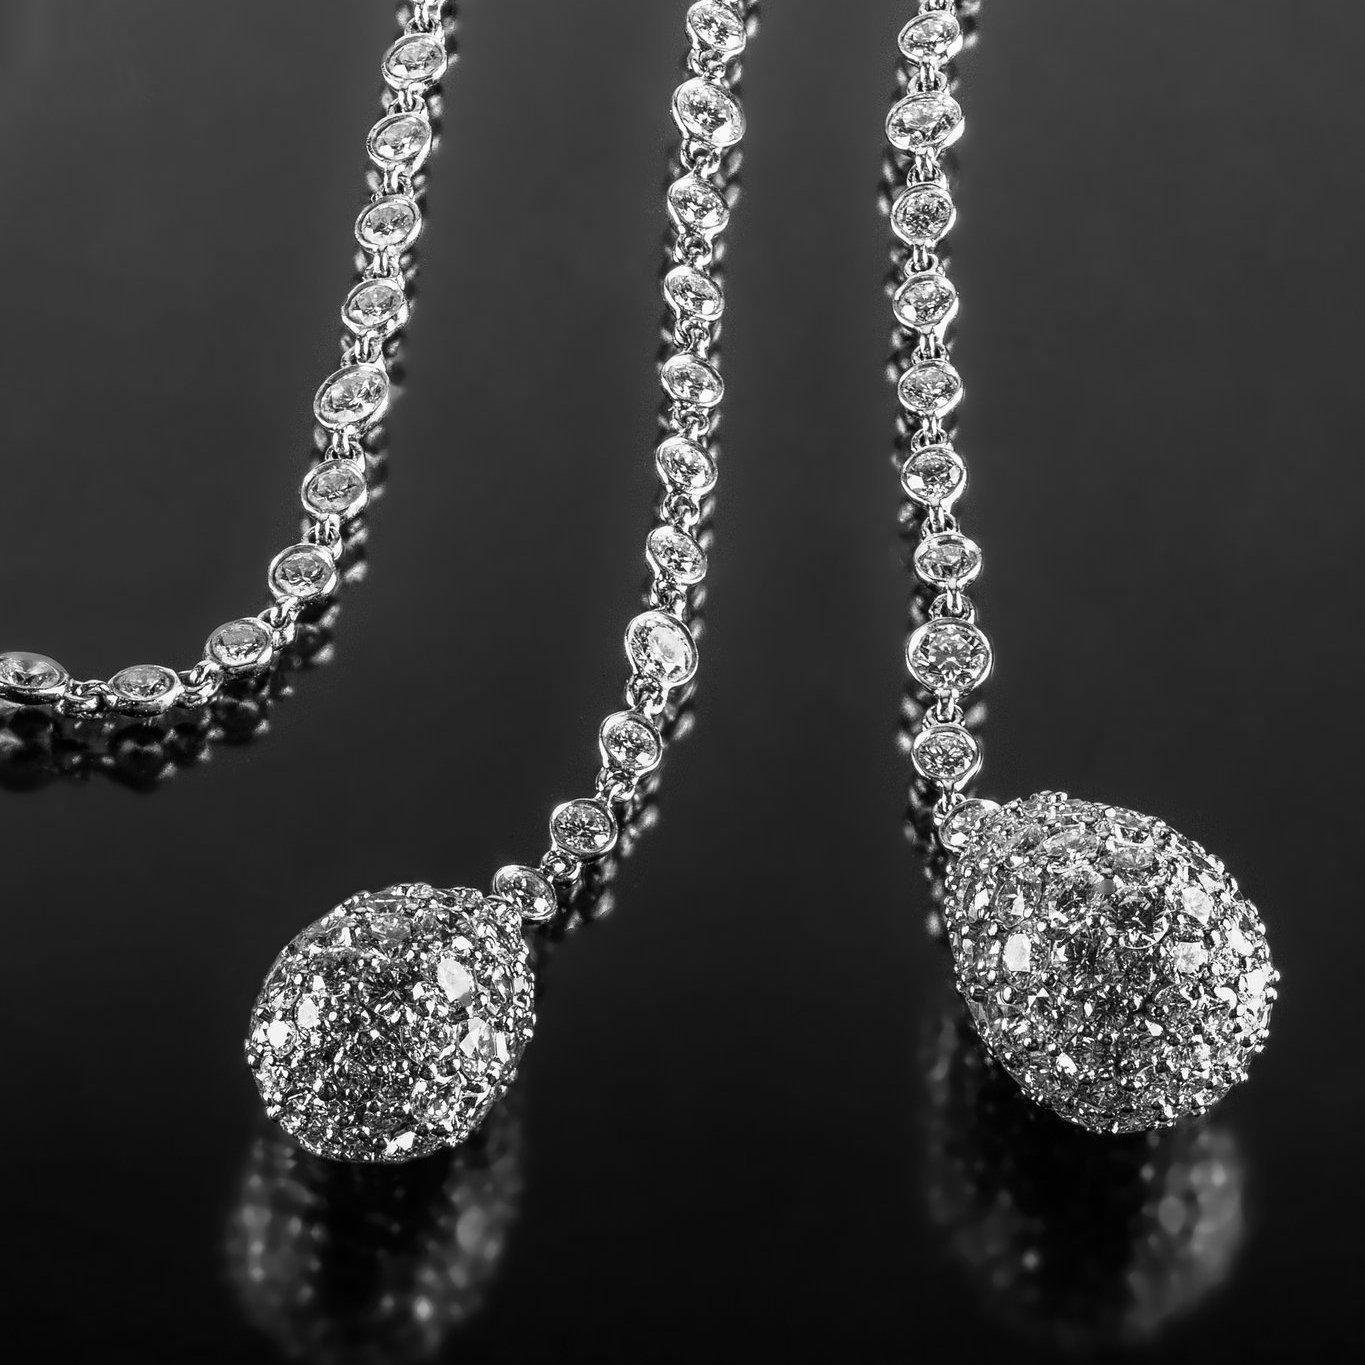 Designed and made by Hammerman Brothers in New York City, this dazzling long-chain lariat is encrusted with approximately 22.59 carats of round brilliant diamonds. At a generous 38 inches, it can be wrapped around the neck several times to create a